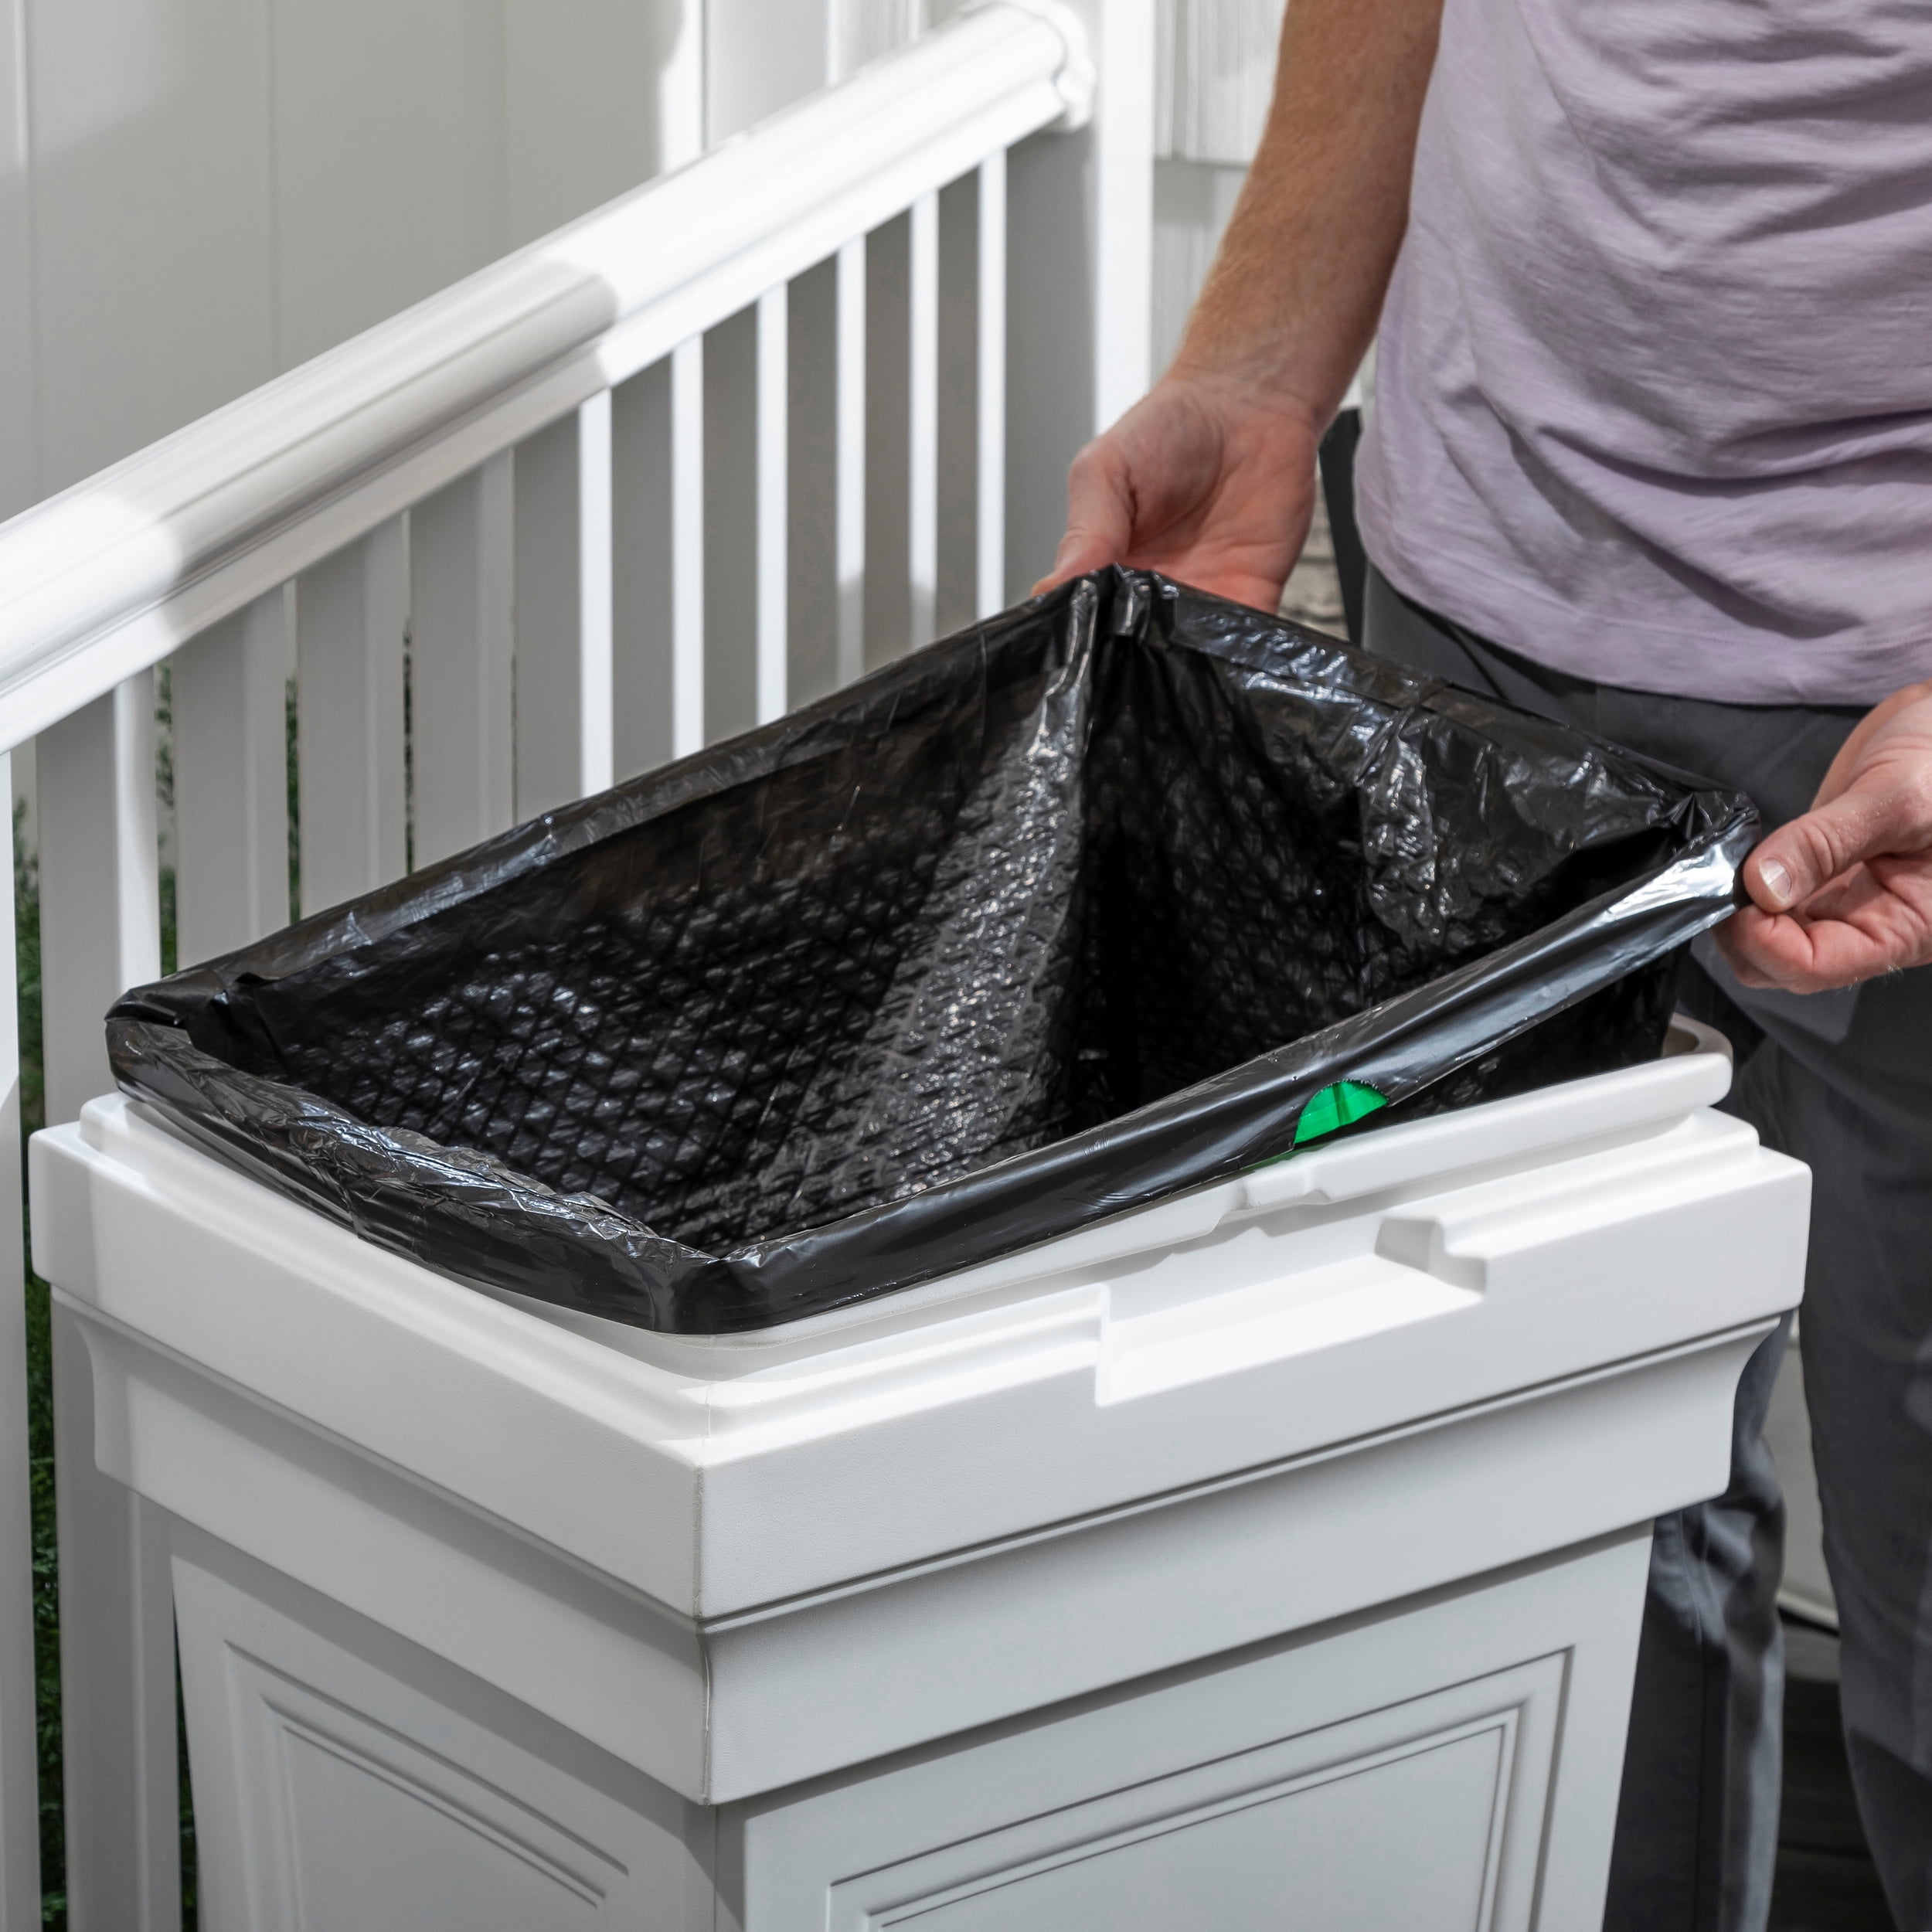 Atherton Garbage Container - Onyx Black from Step2